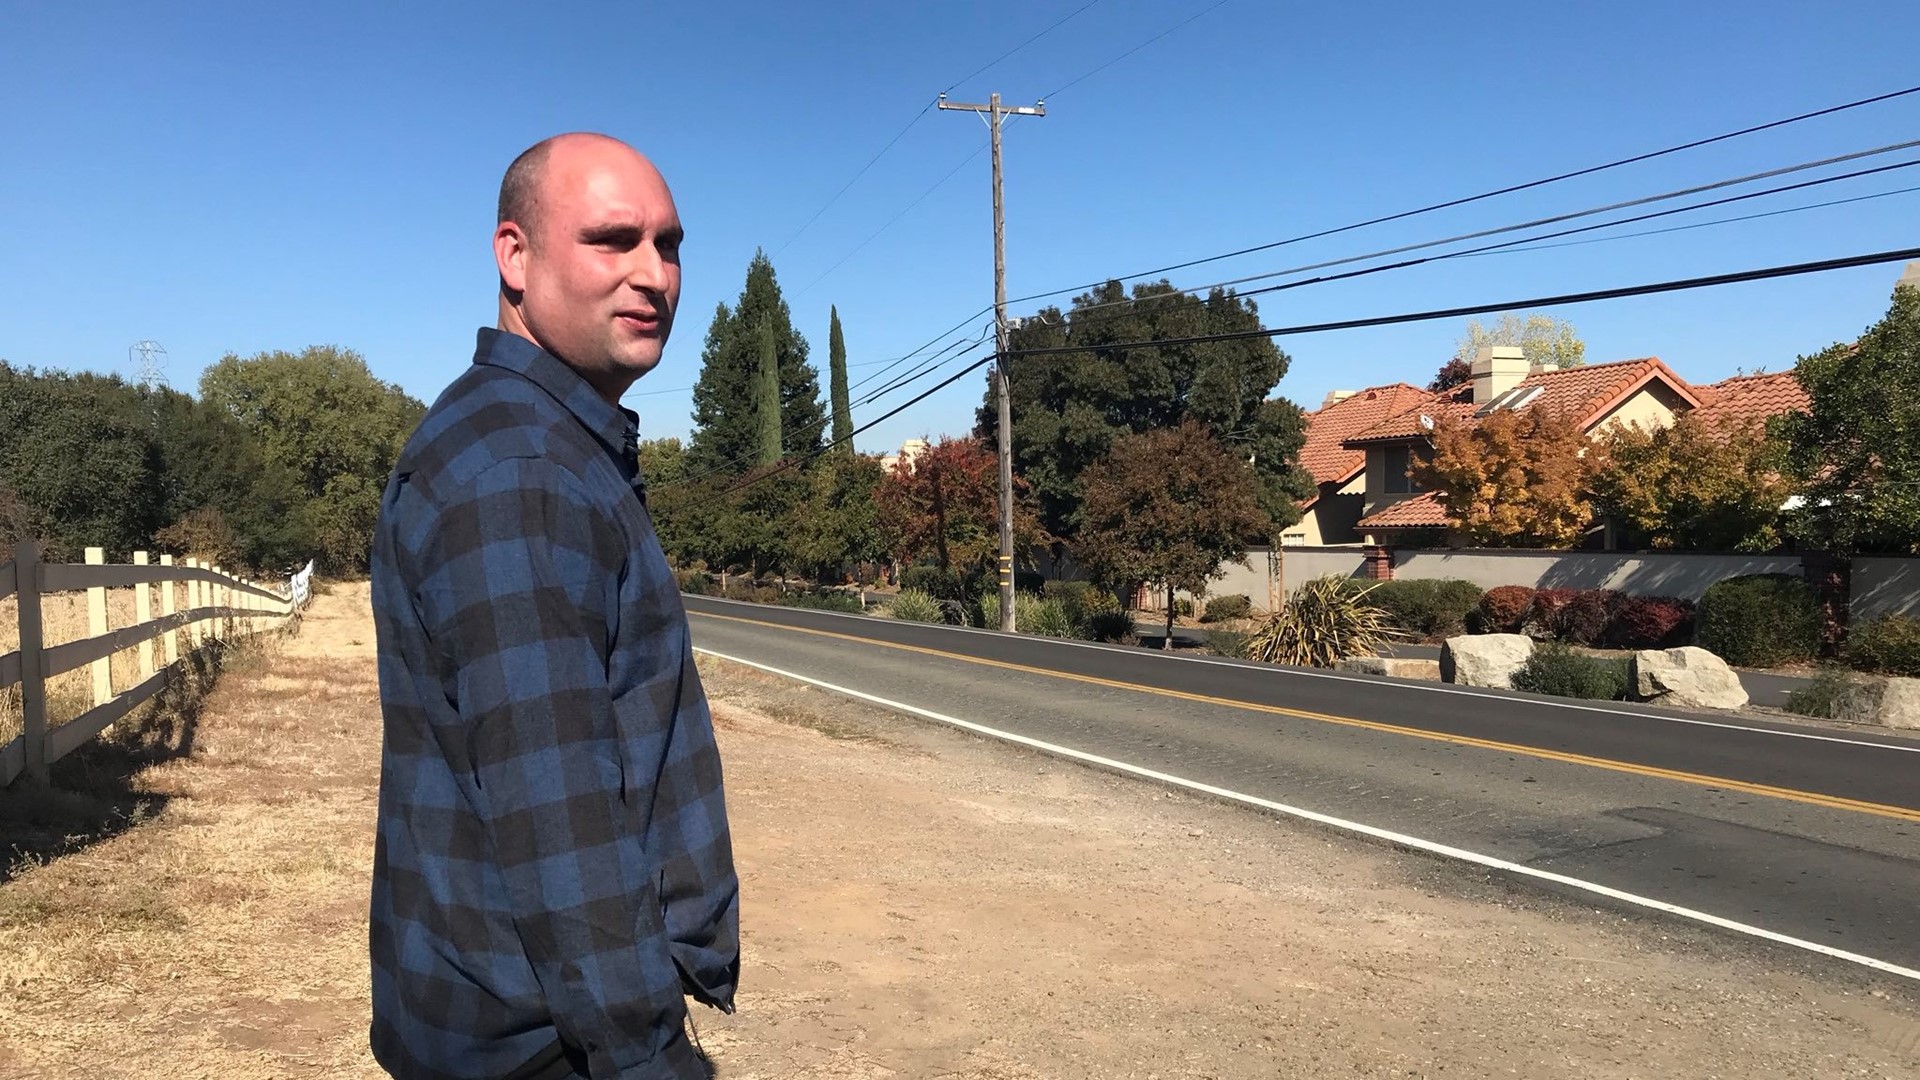 Losing his dog to a hit-and-run accident was the final straw for John Gallico after watching drivers speed by his home on Santa Juanita Avenue for decades.